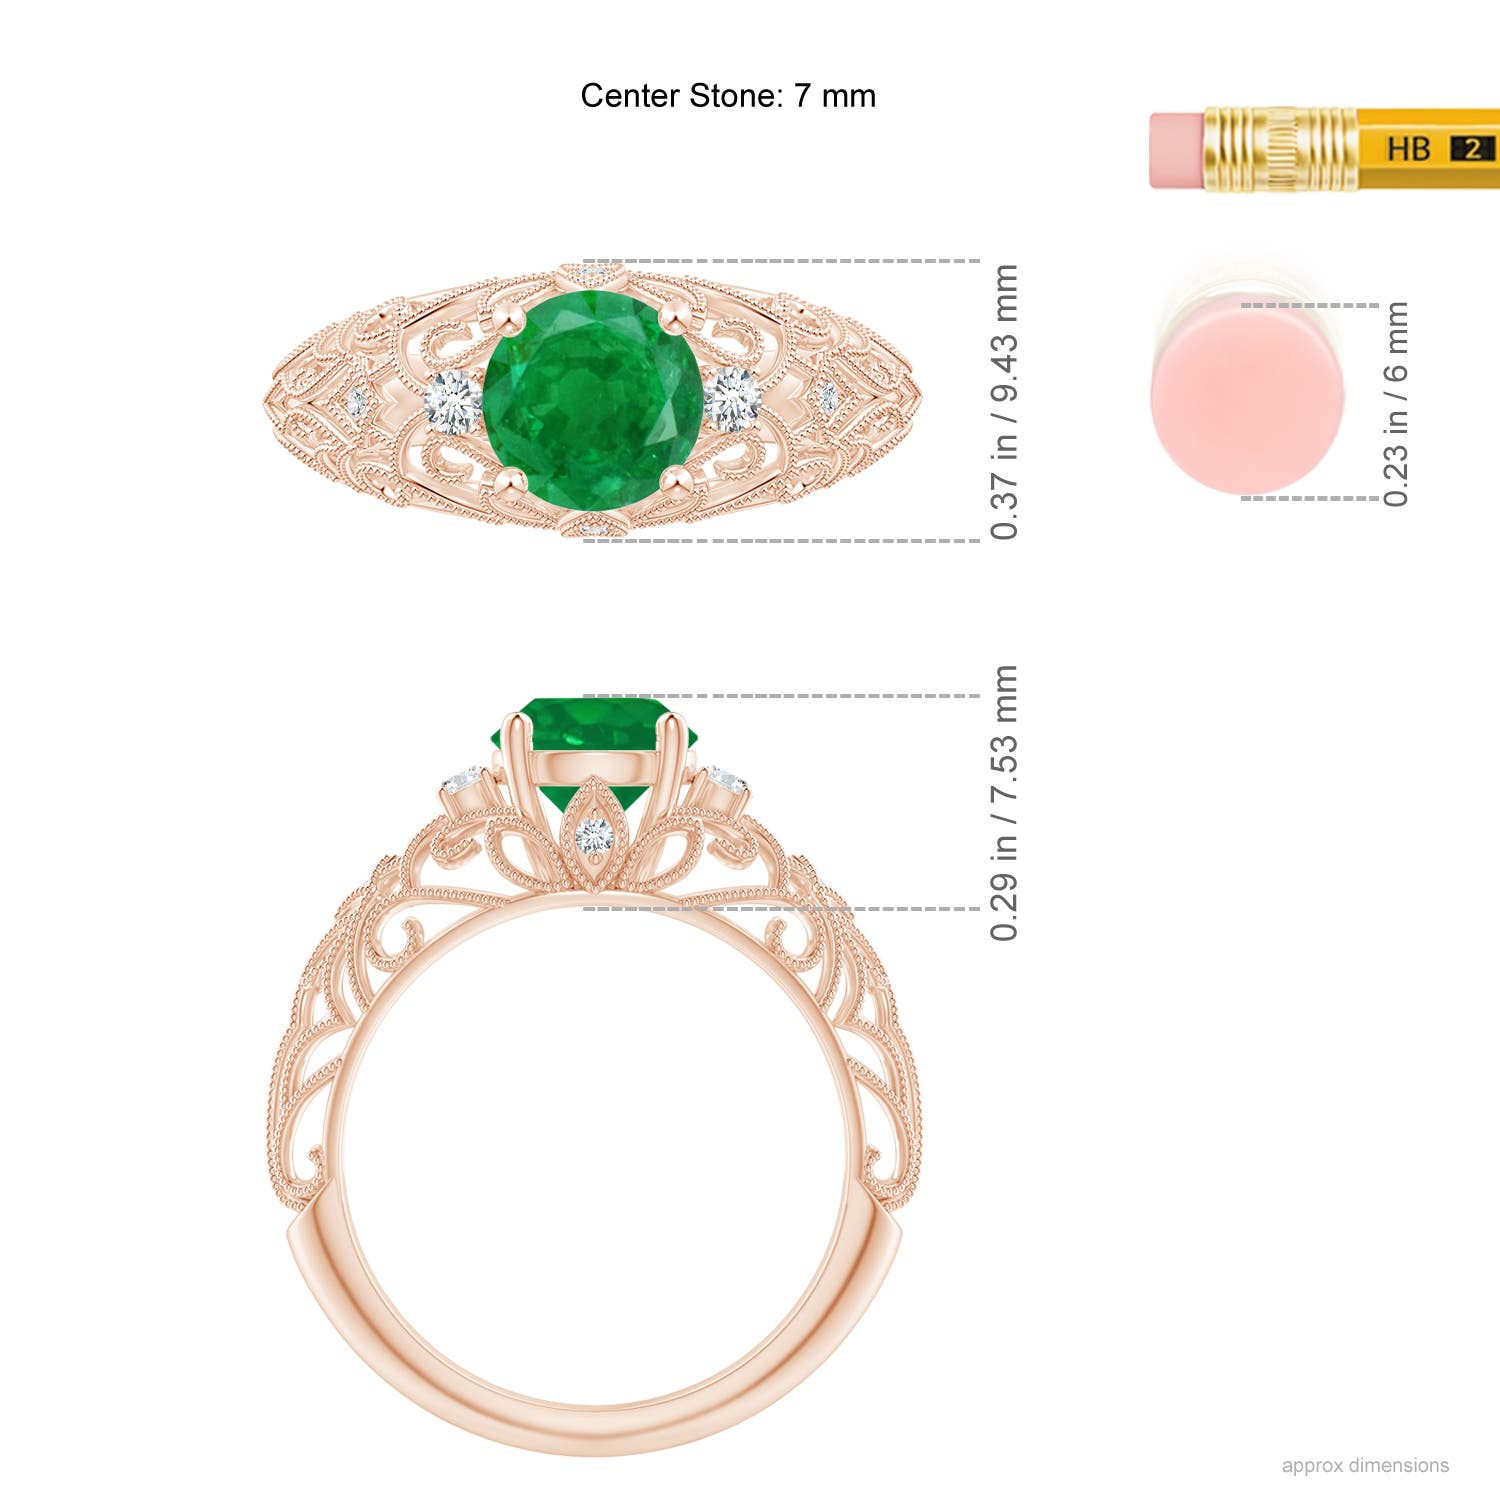 AA - Emerald / 1.3 CT / 14 KT Rose Gold